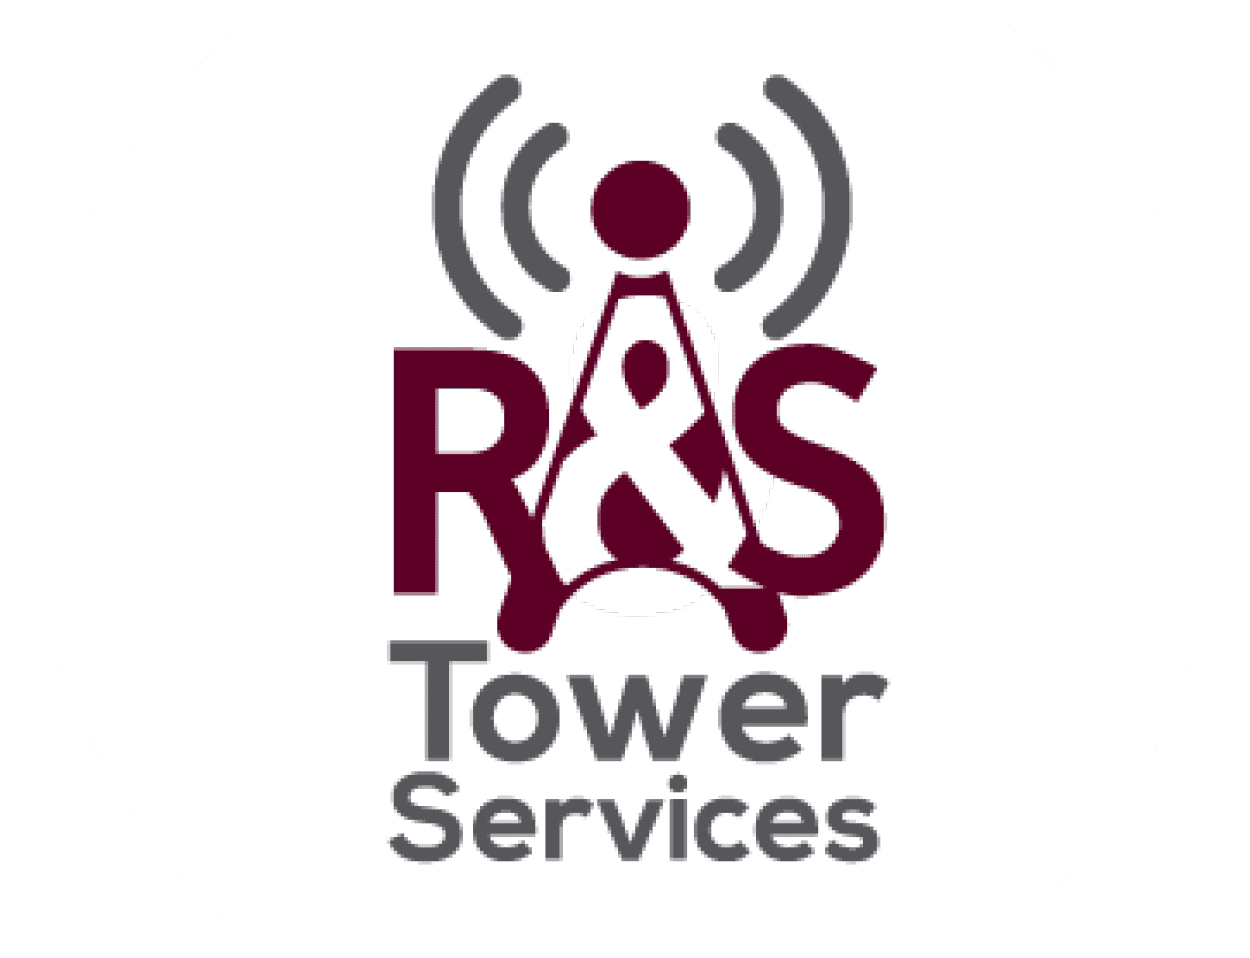 R&S Tower Services